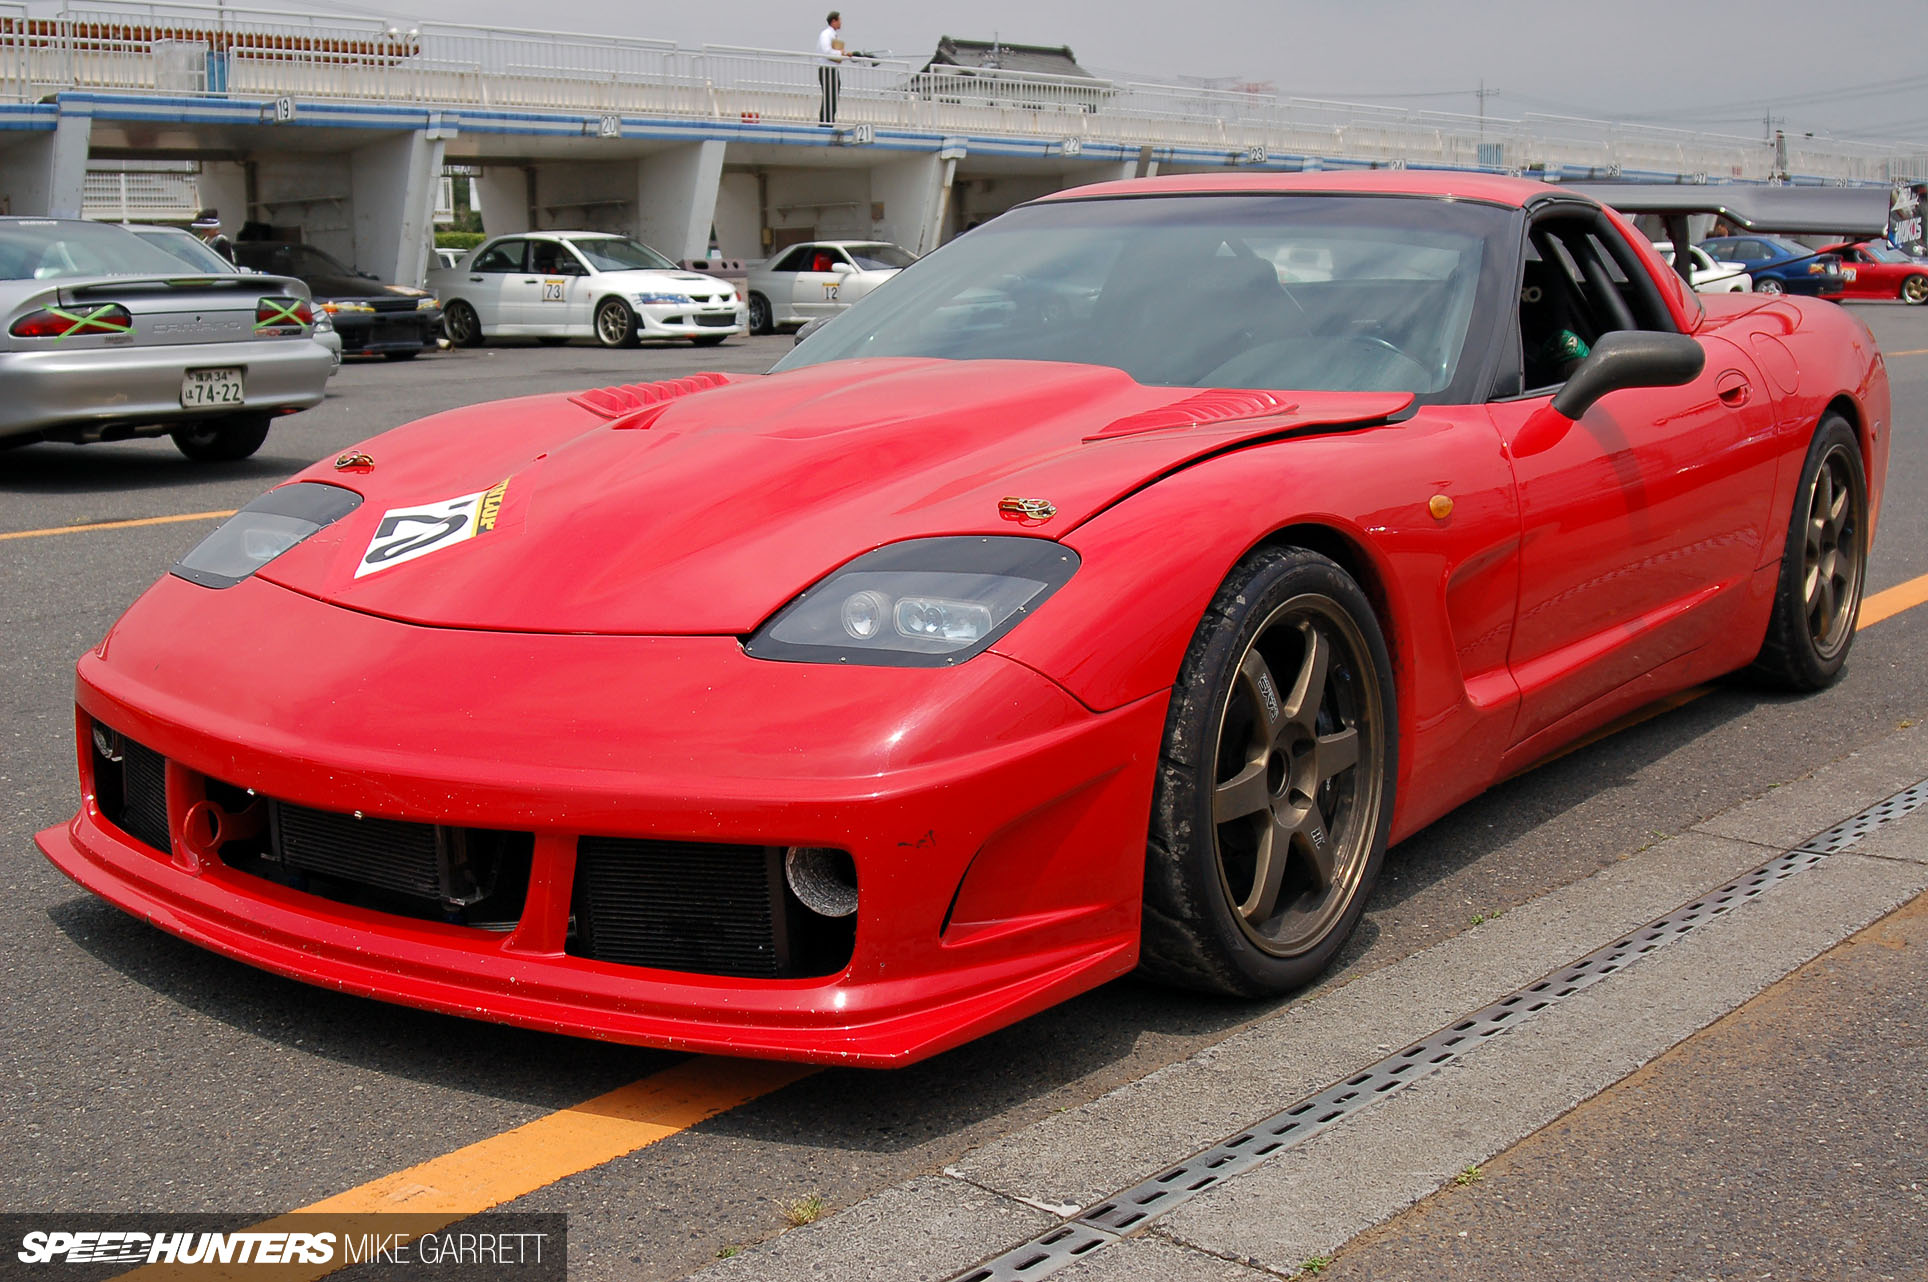 There was a serious C5 Corvette sporting a fixed headlight conversion and a...